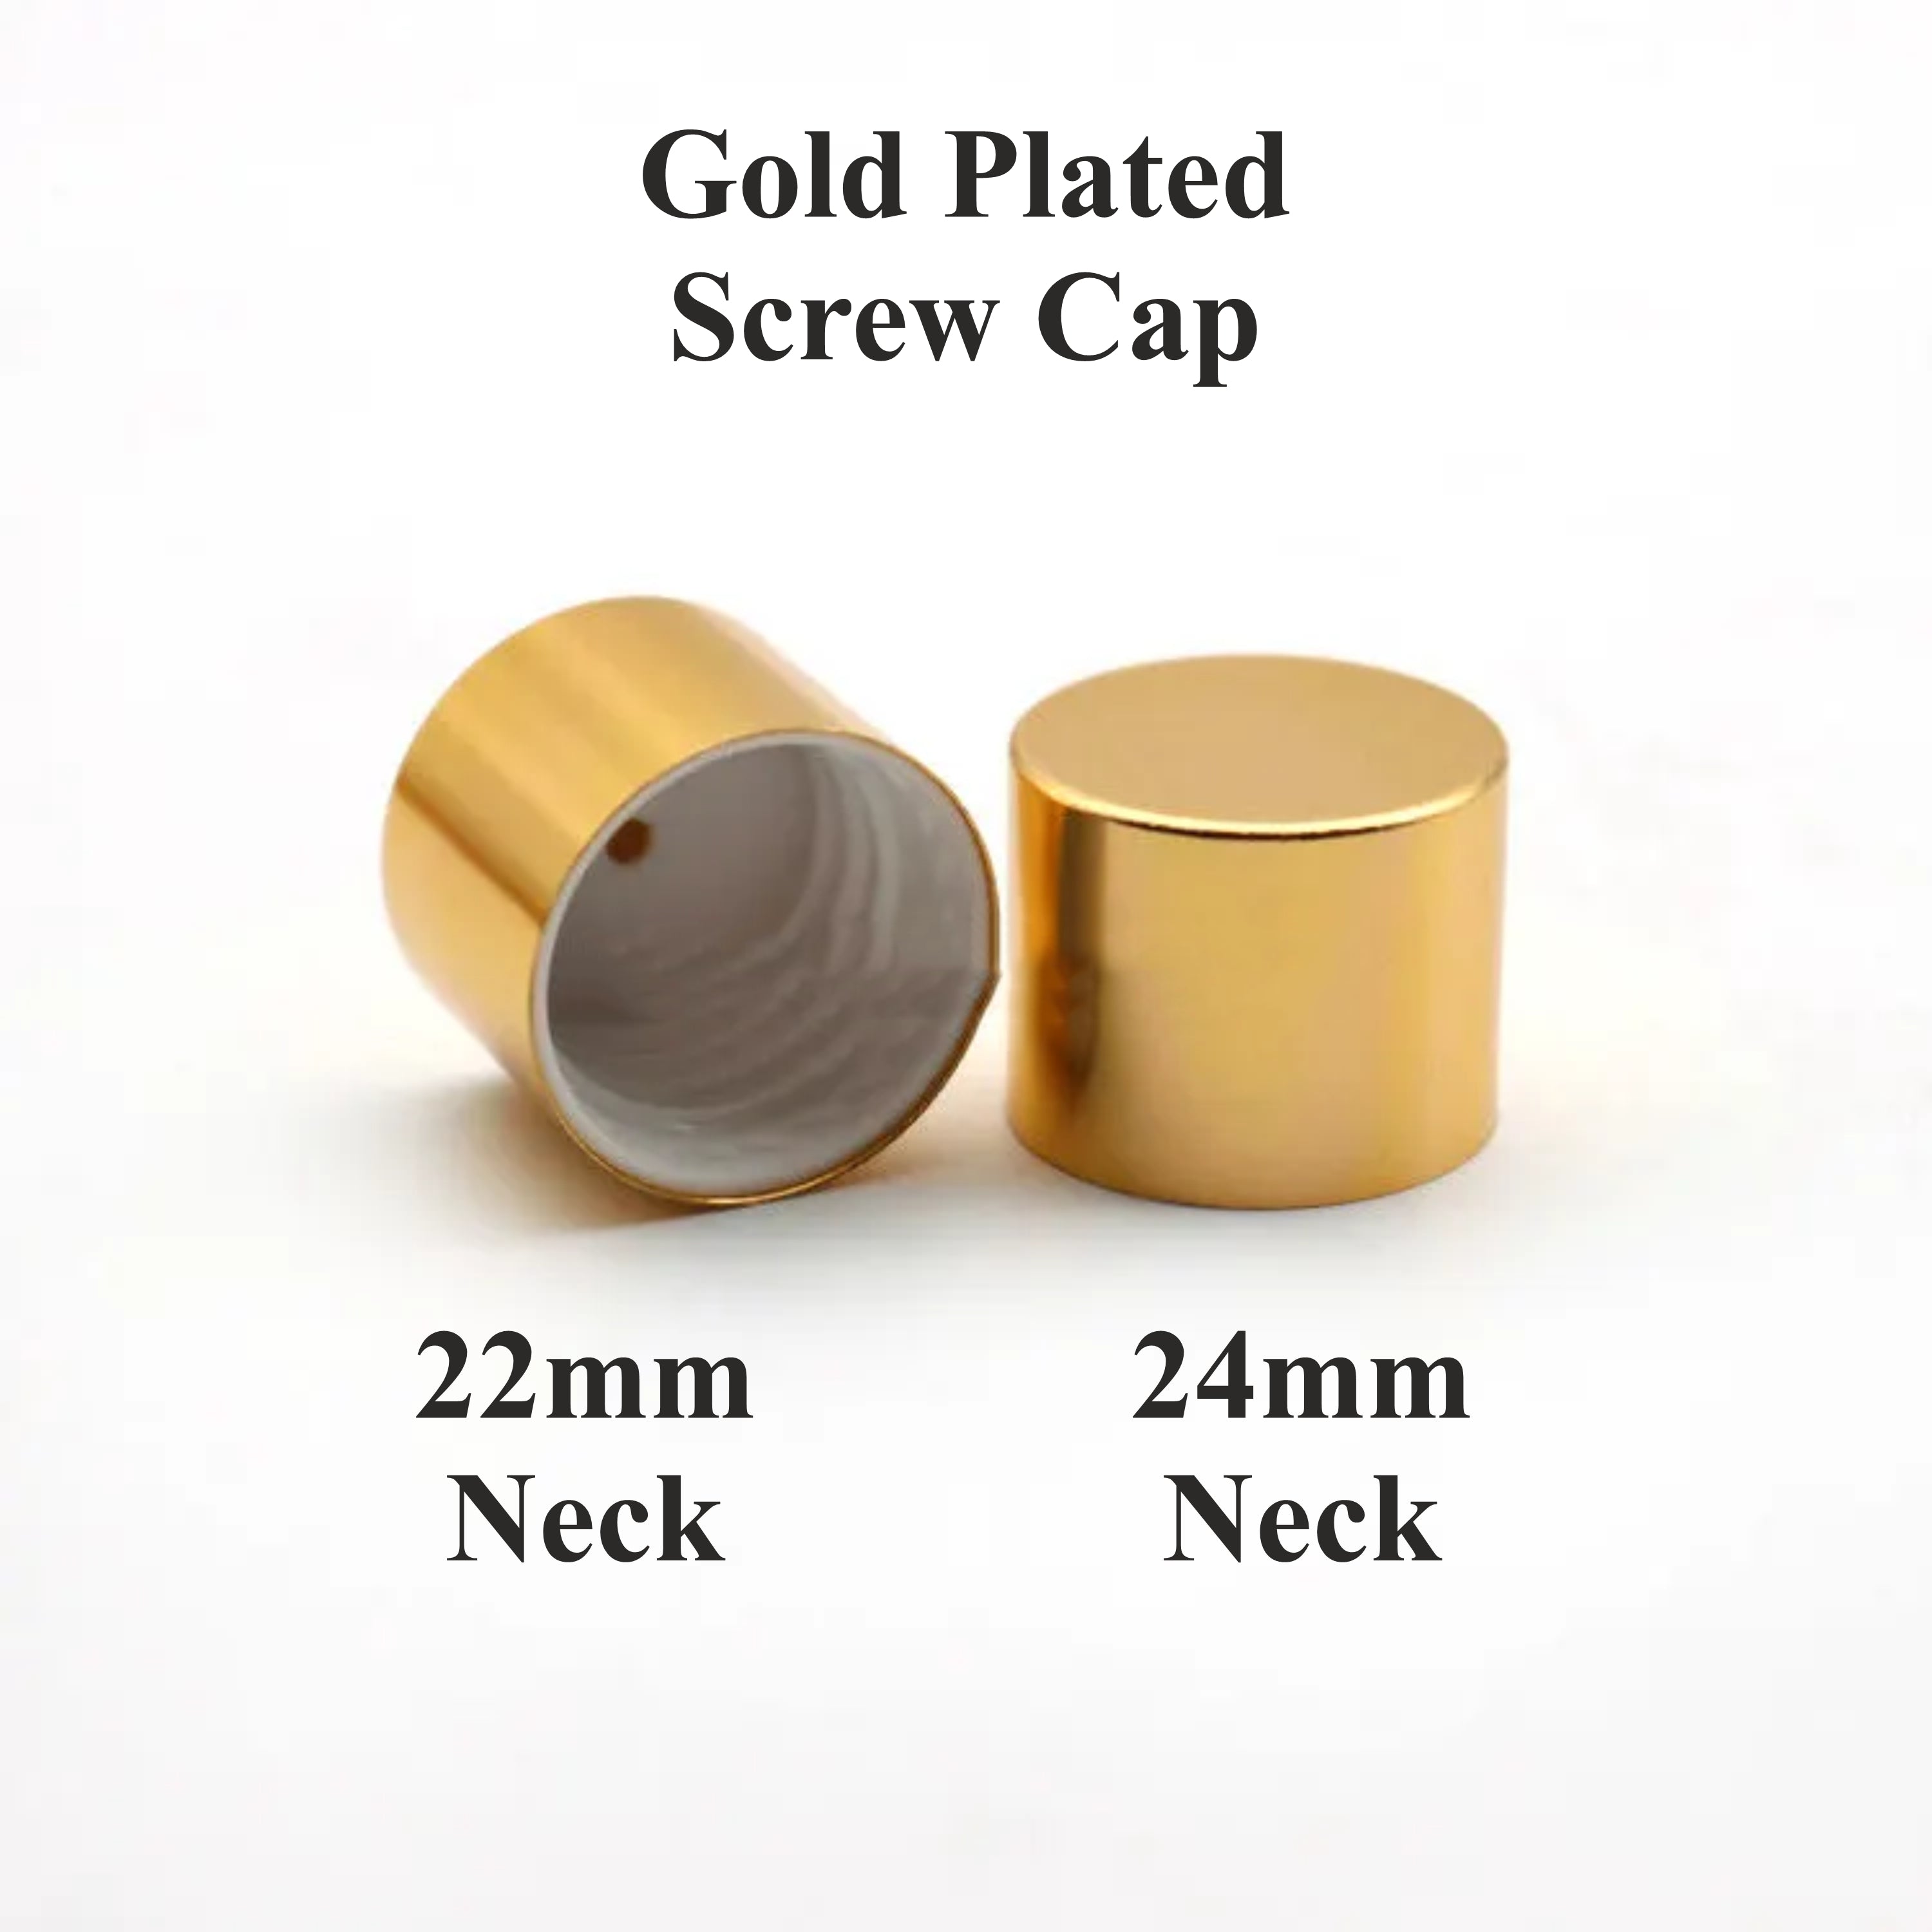 [ZMPC18] Beautiful Gold Plated Screw Cap - 20mm & 24mm Neck